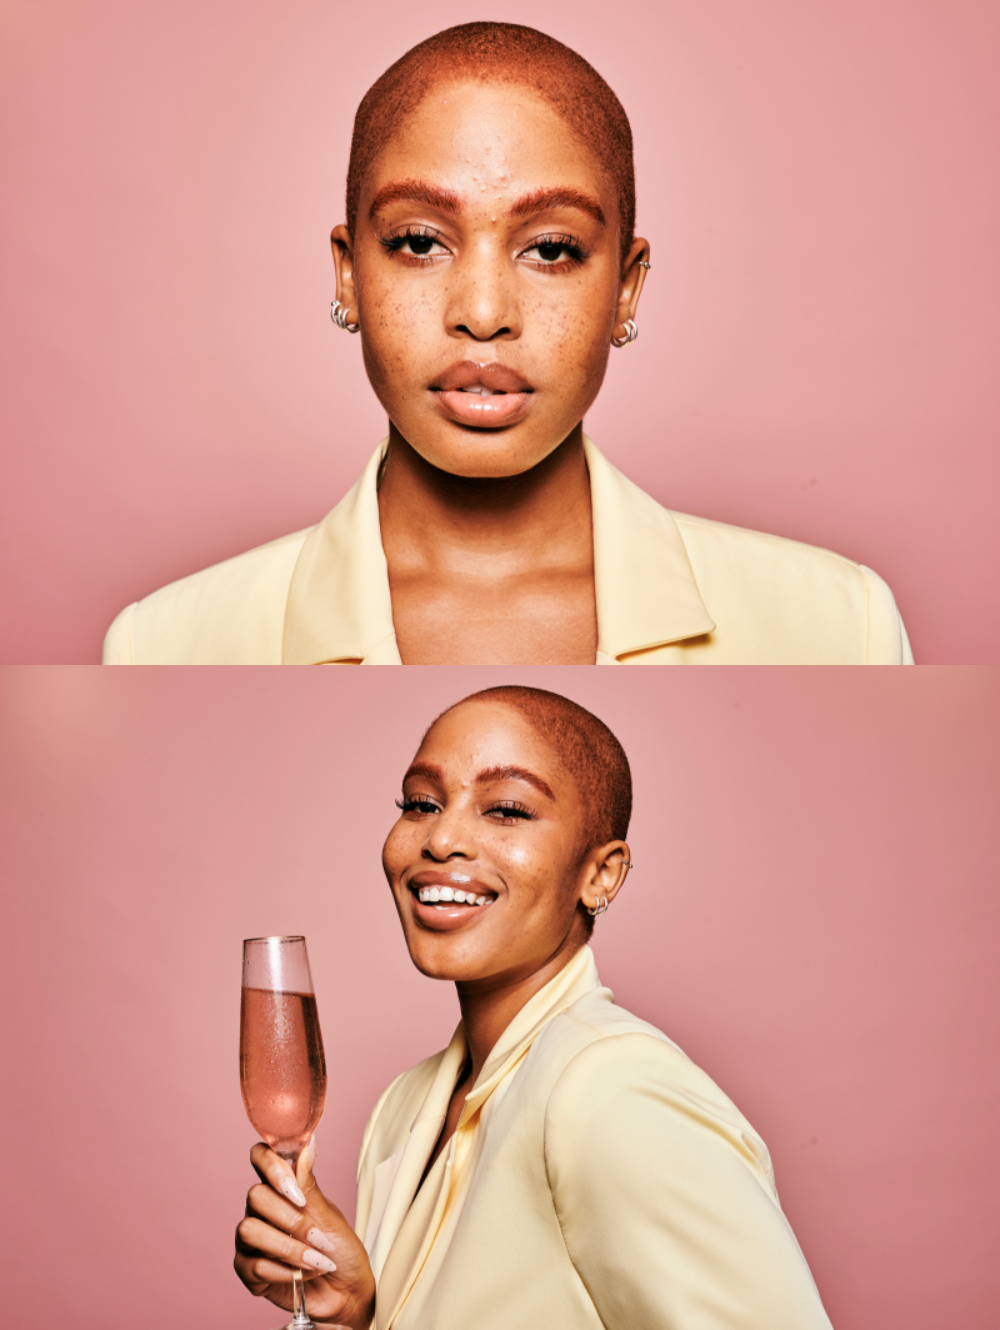 makeup, beauty, makeup trends, beauty trends, winter, winter makeup, winter trends, cosmetics, black woman with bald head and bejewelled eyes, diamantes, brutal fruit, brutal fruit spritzer, the suite, the suite edit